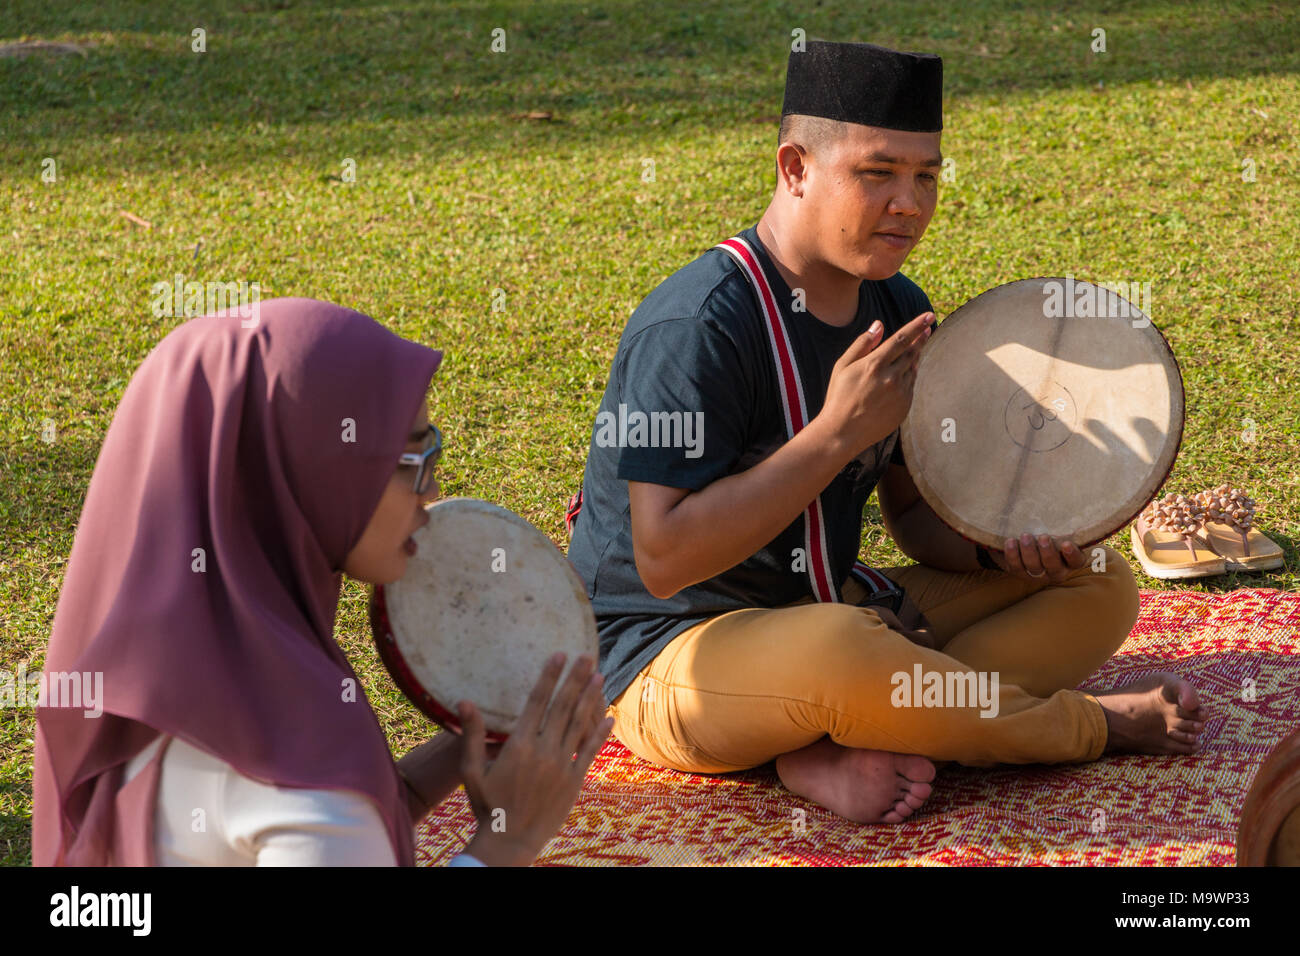 A Malay man with a sonkok and a Malay woman wearing a hijab are sitting on a traditional rattan mat and showing how to play the kompang (Malay drum). Stock Photo